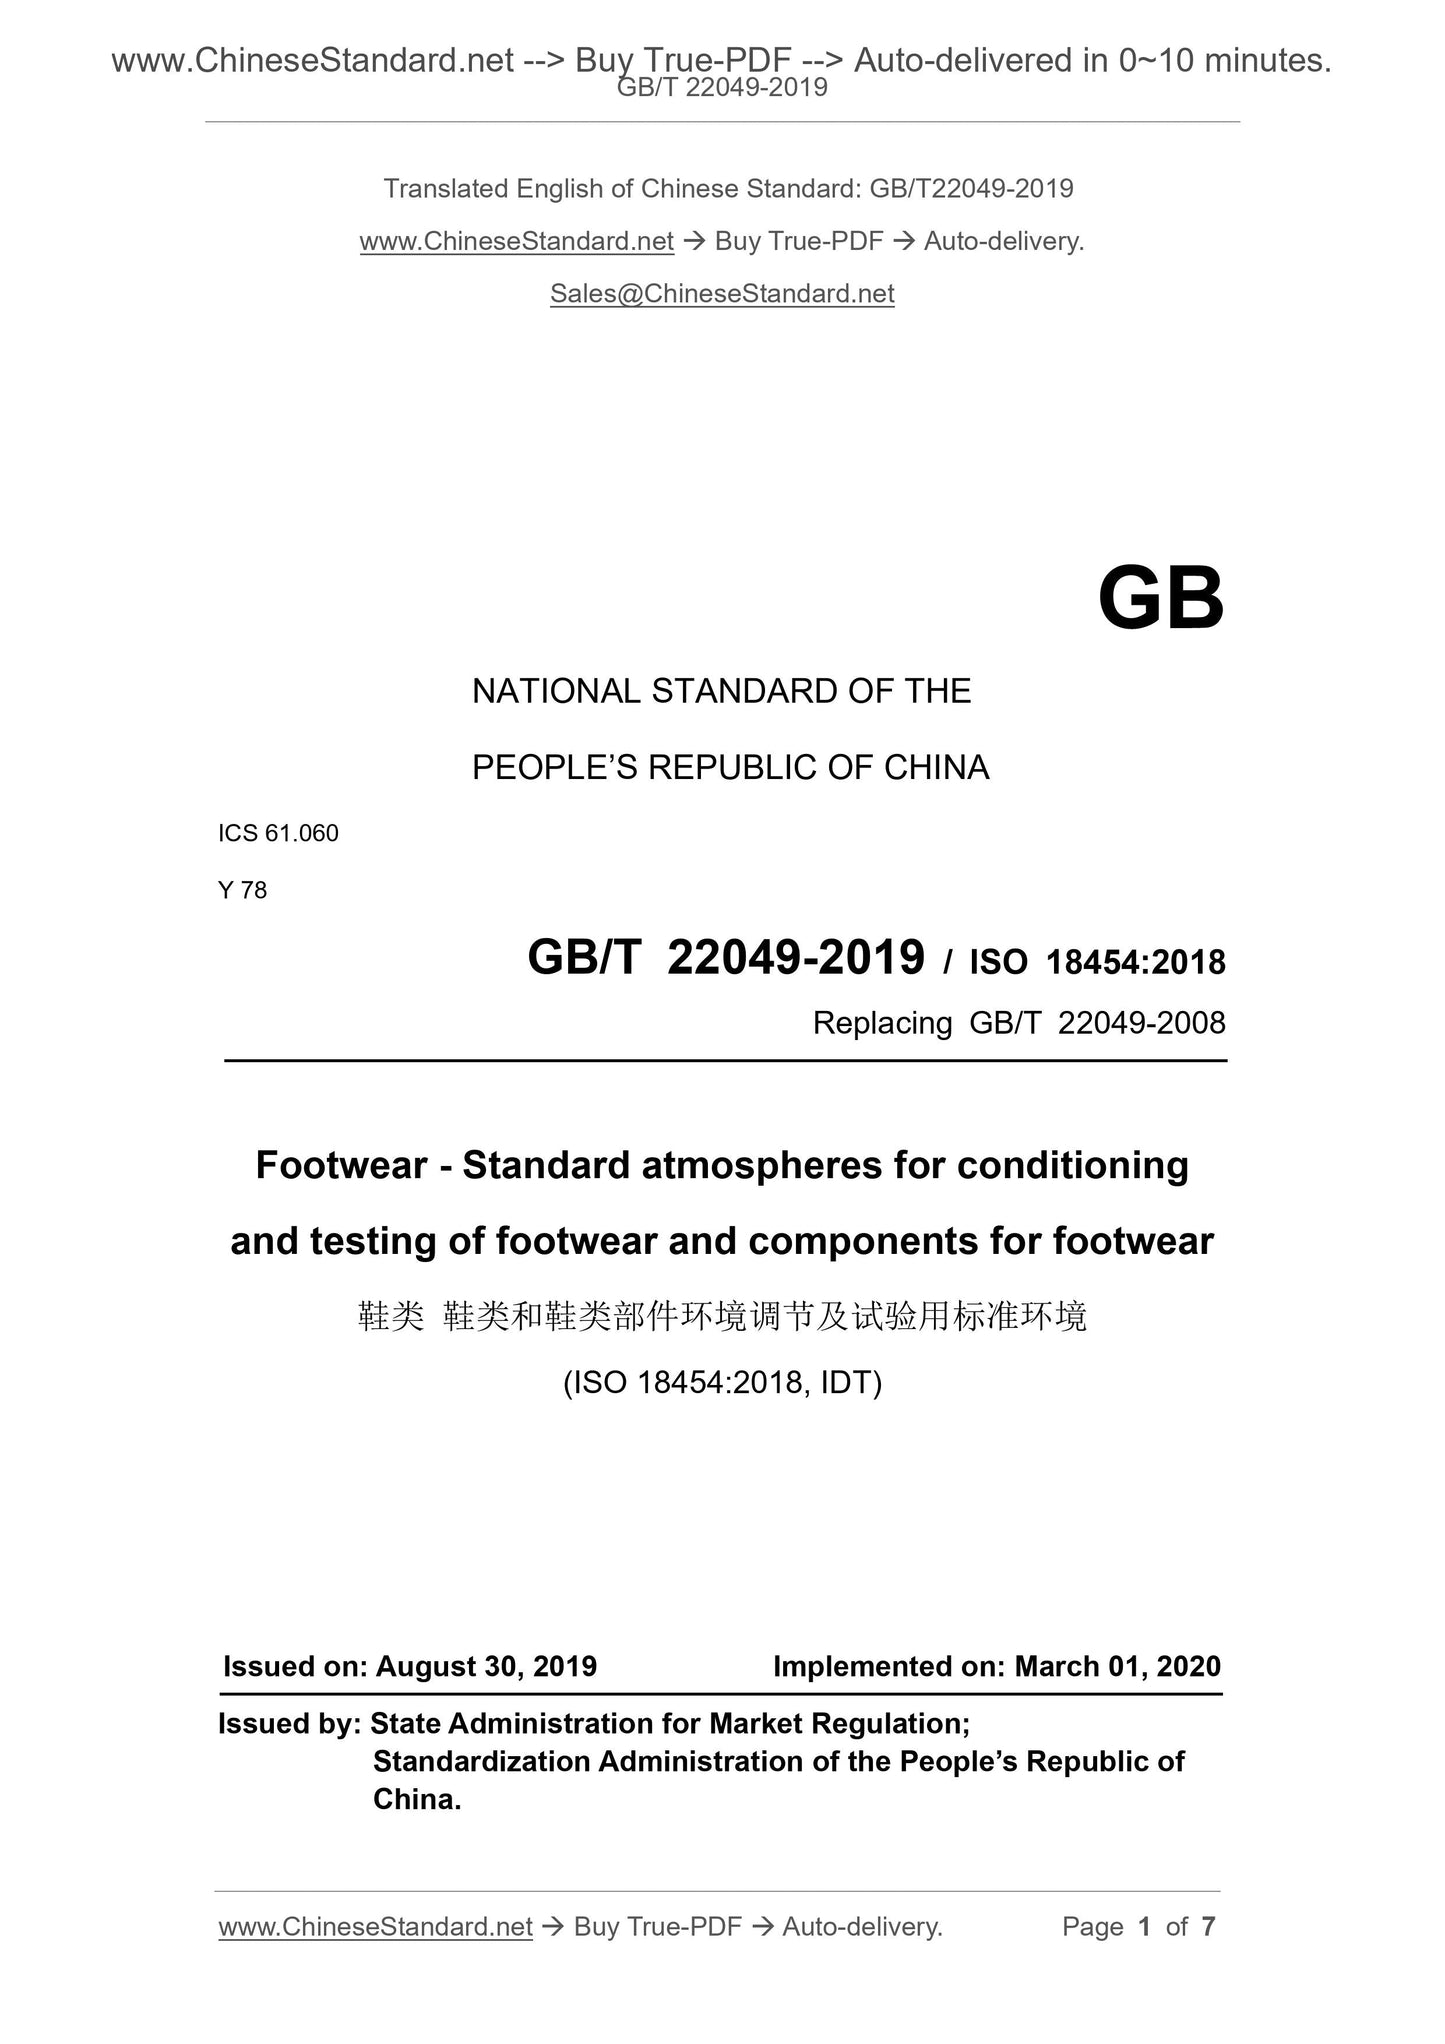 GB/T 22049-2019 Page 1